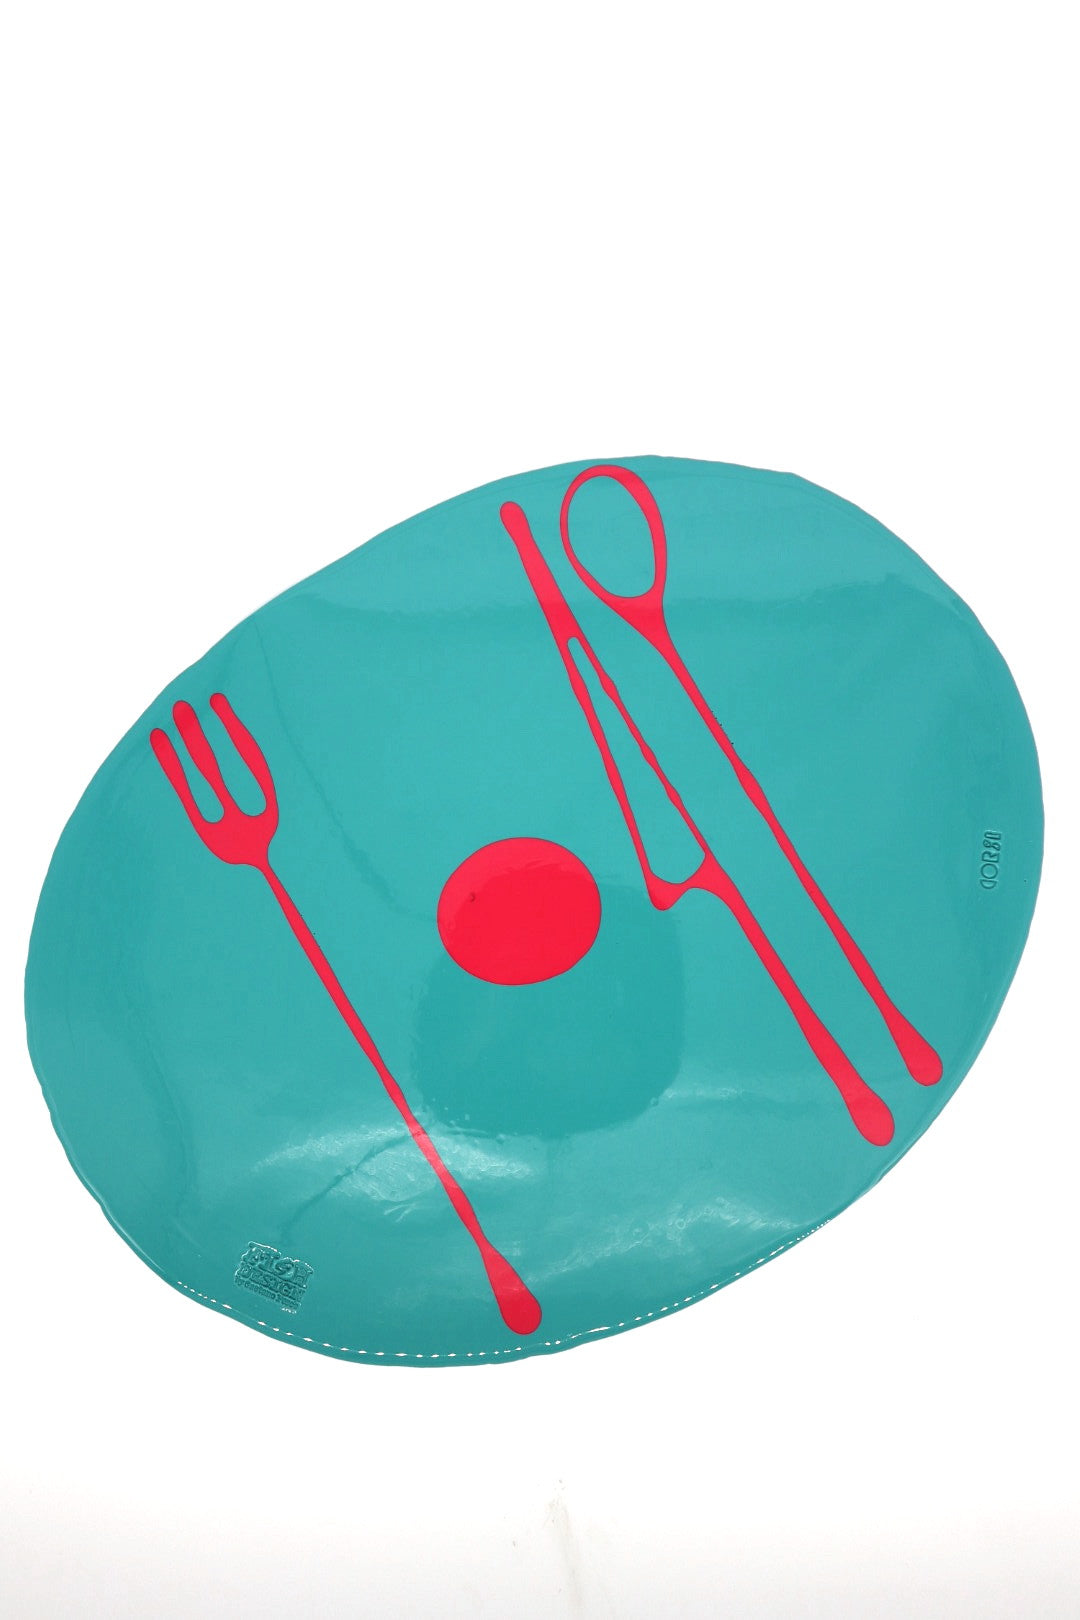 Placemat by Fish Design by Gaetano Pesce